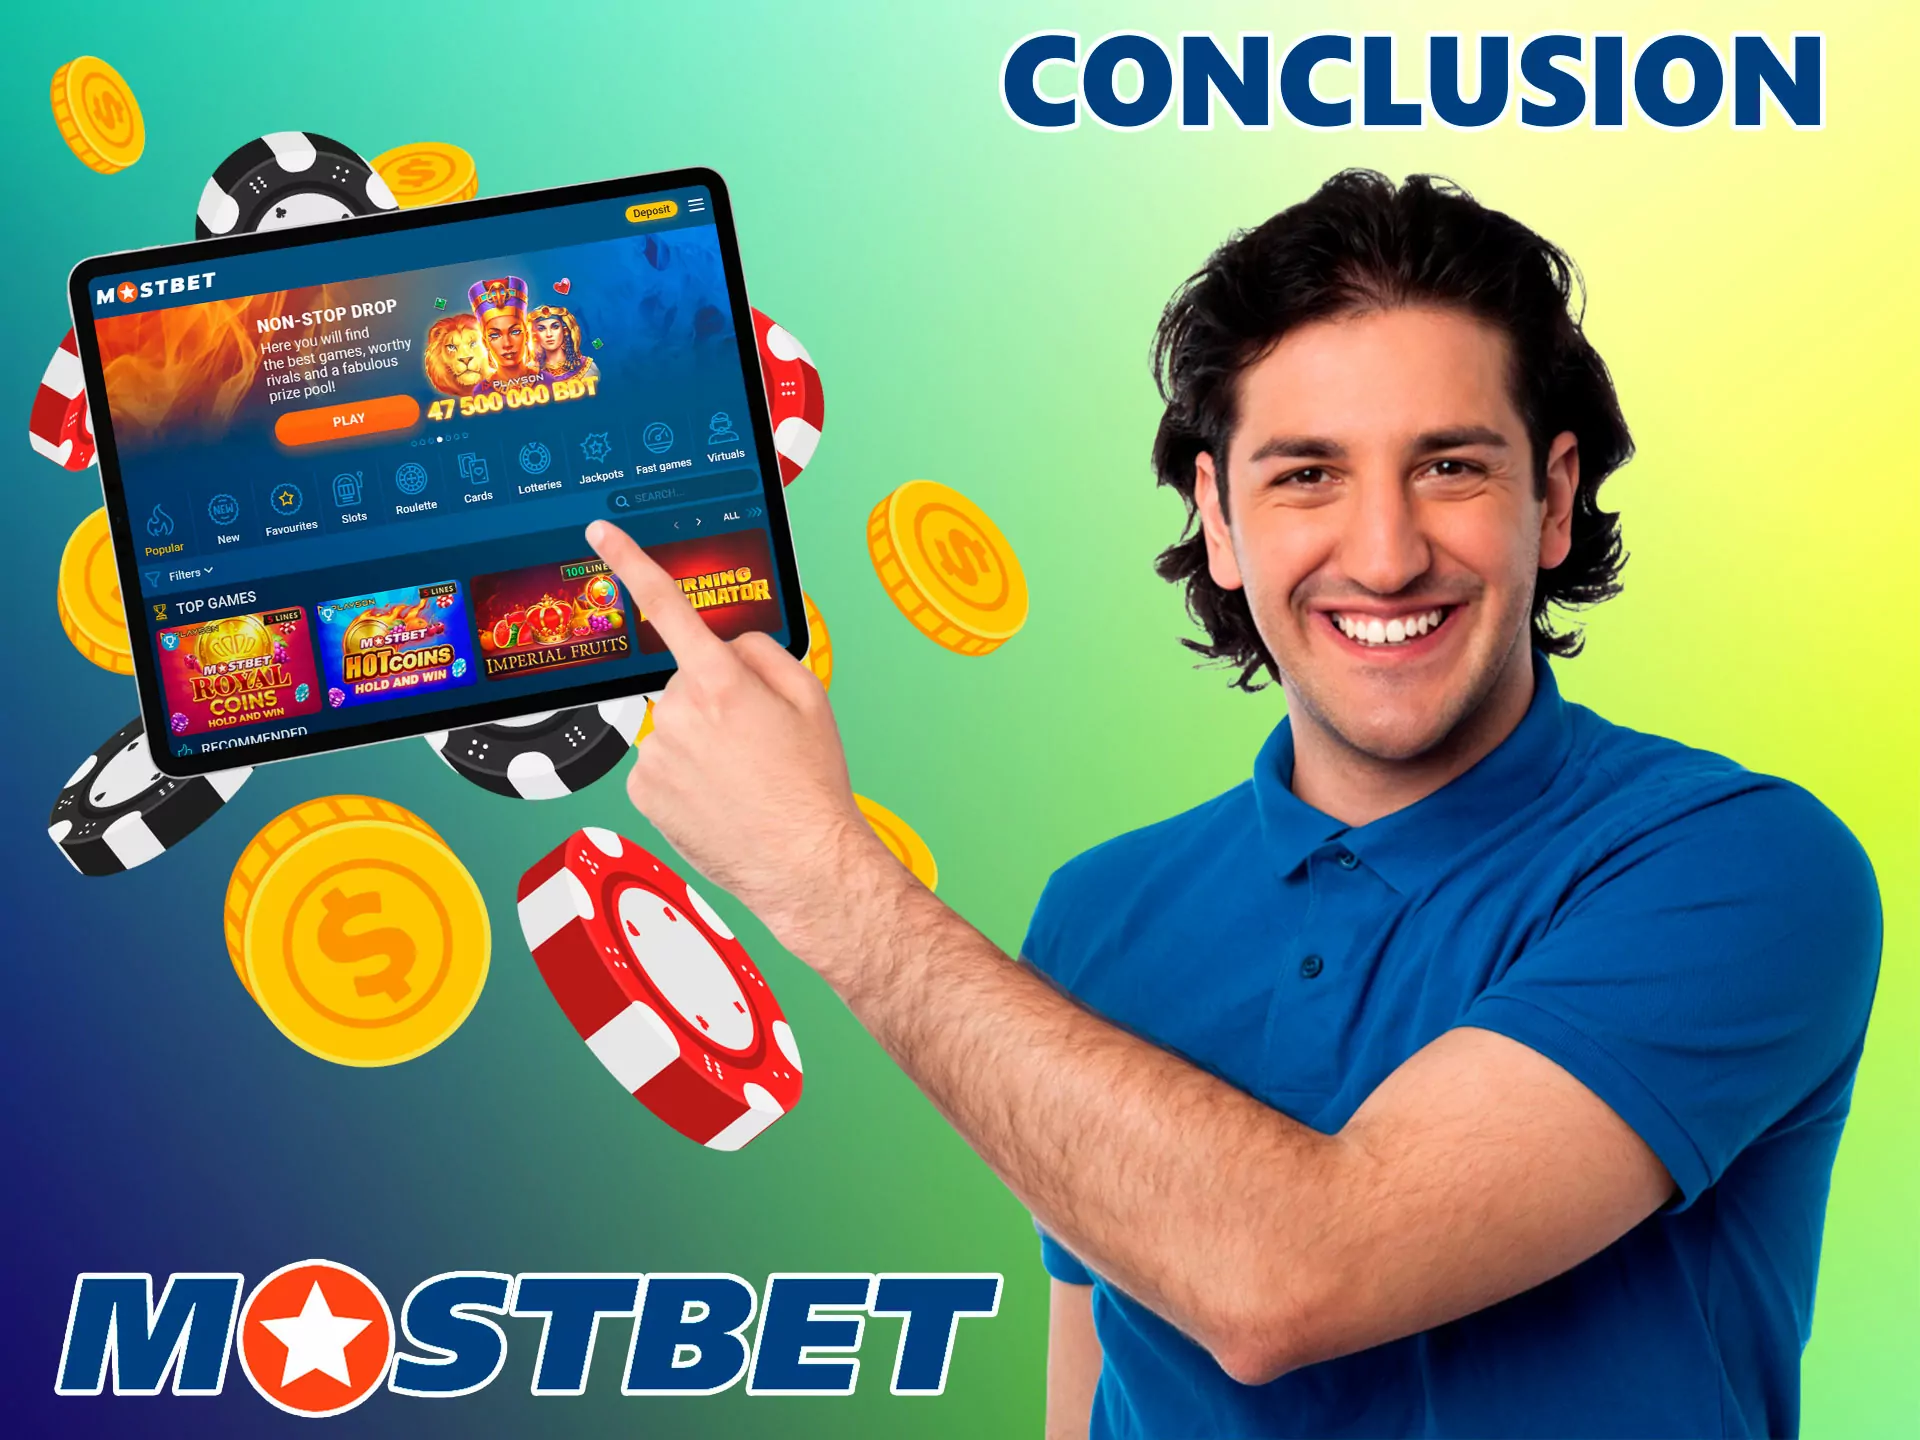 Mostbet site is very popular in Bangladesh, the audience is constantly growing, this casino is worth a try for everyone.